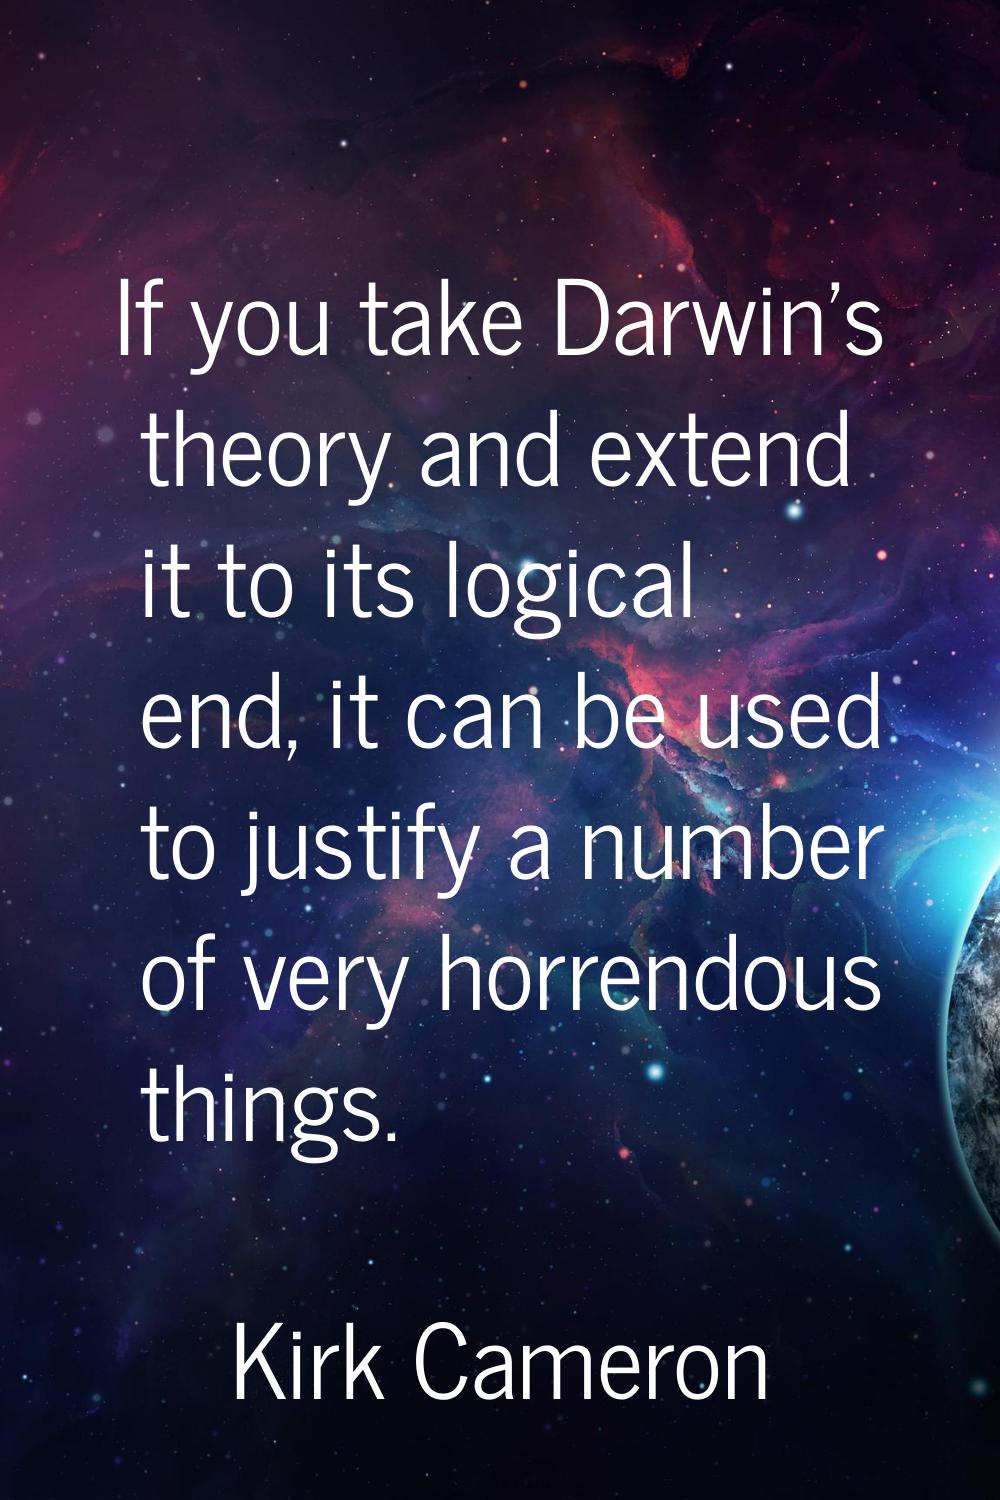 If you take Darwin's theory and extend it to its logical end, it can be used to justify a number of